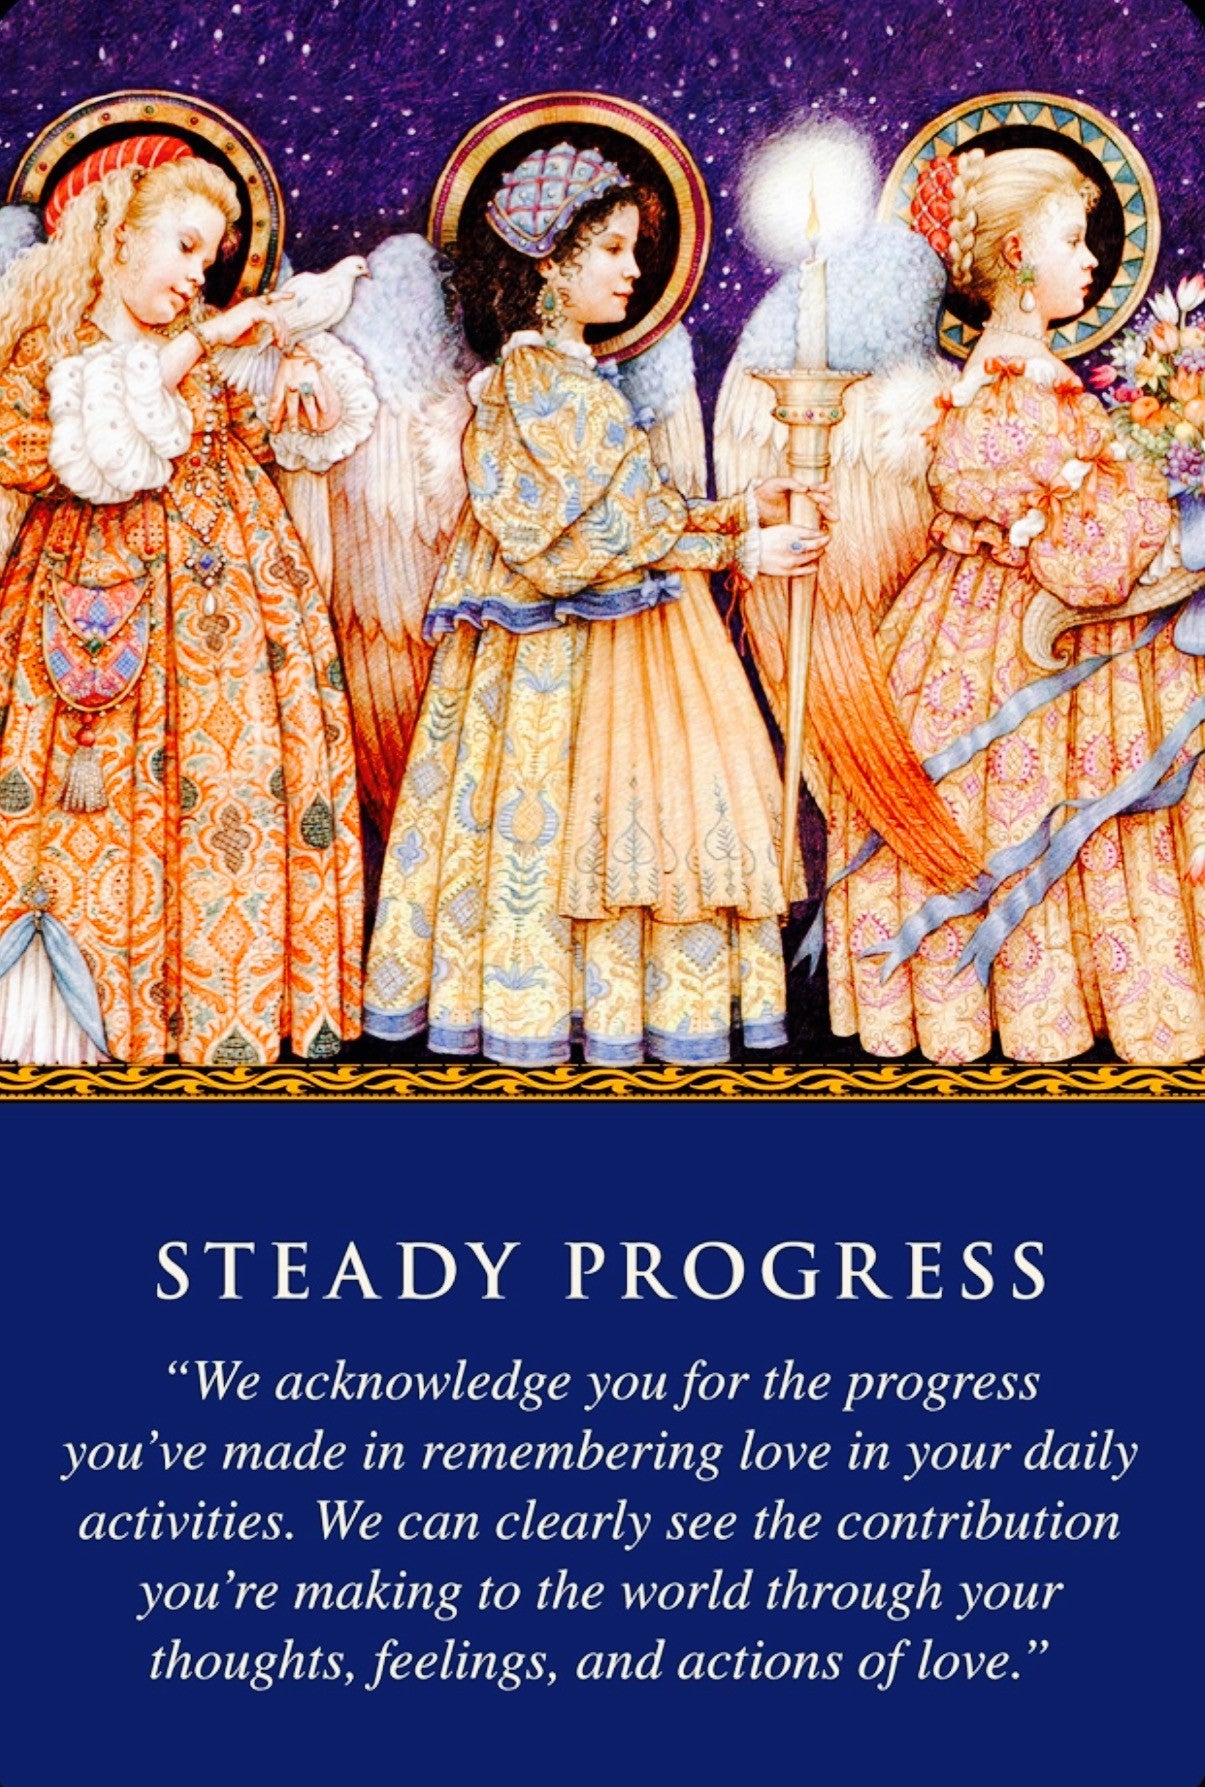 Daily Guidance From Your Angels: Steady Progress.